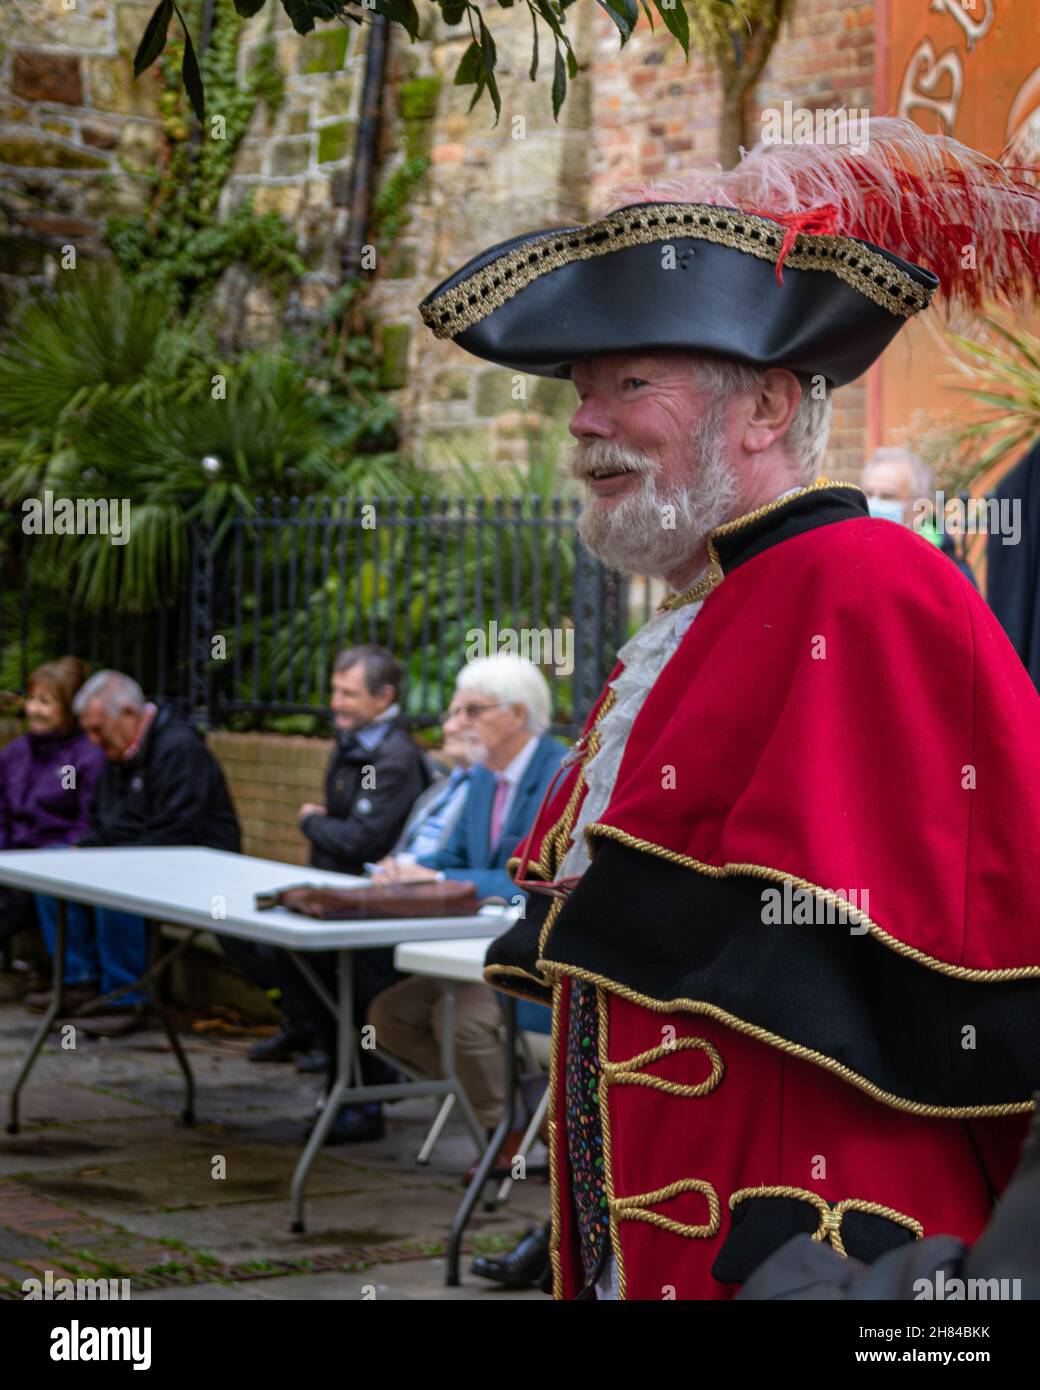 A man dressed as a town crier in the uk, wearing a red cloak with black and gold trim and a black tricorn hat with a peacock feather. White beard. Stock Photo